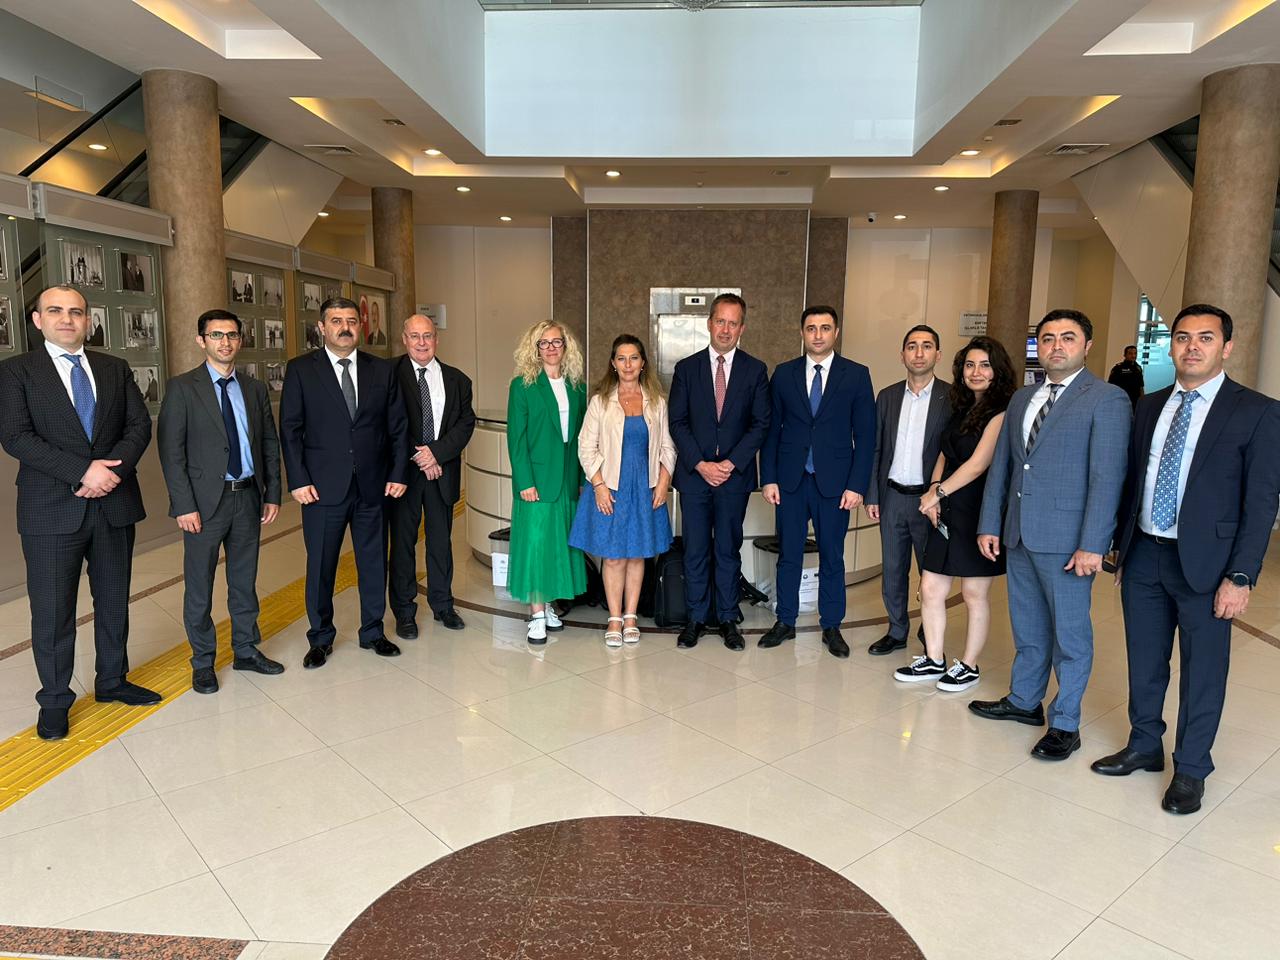 UIHJ involved in two projects in Azerbaijan